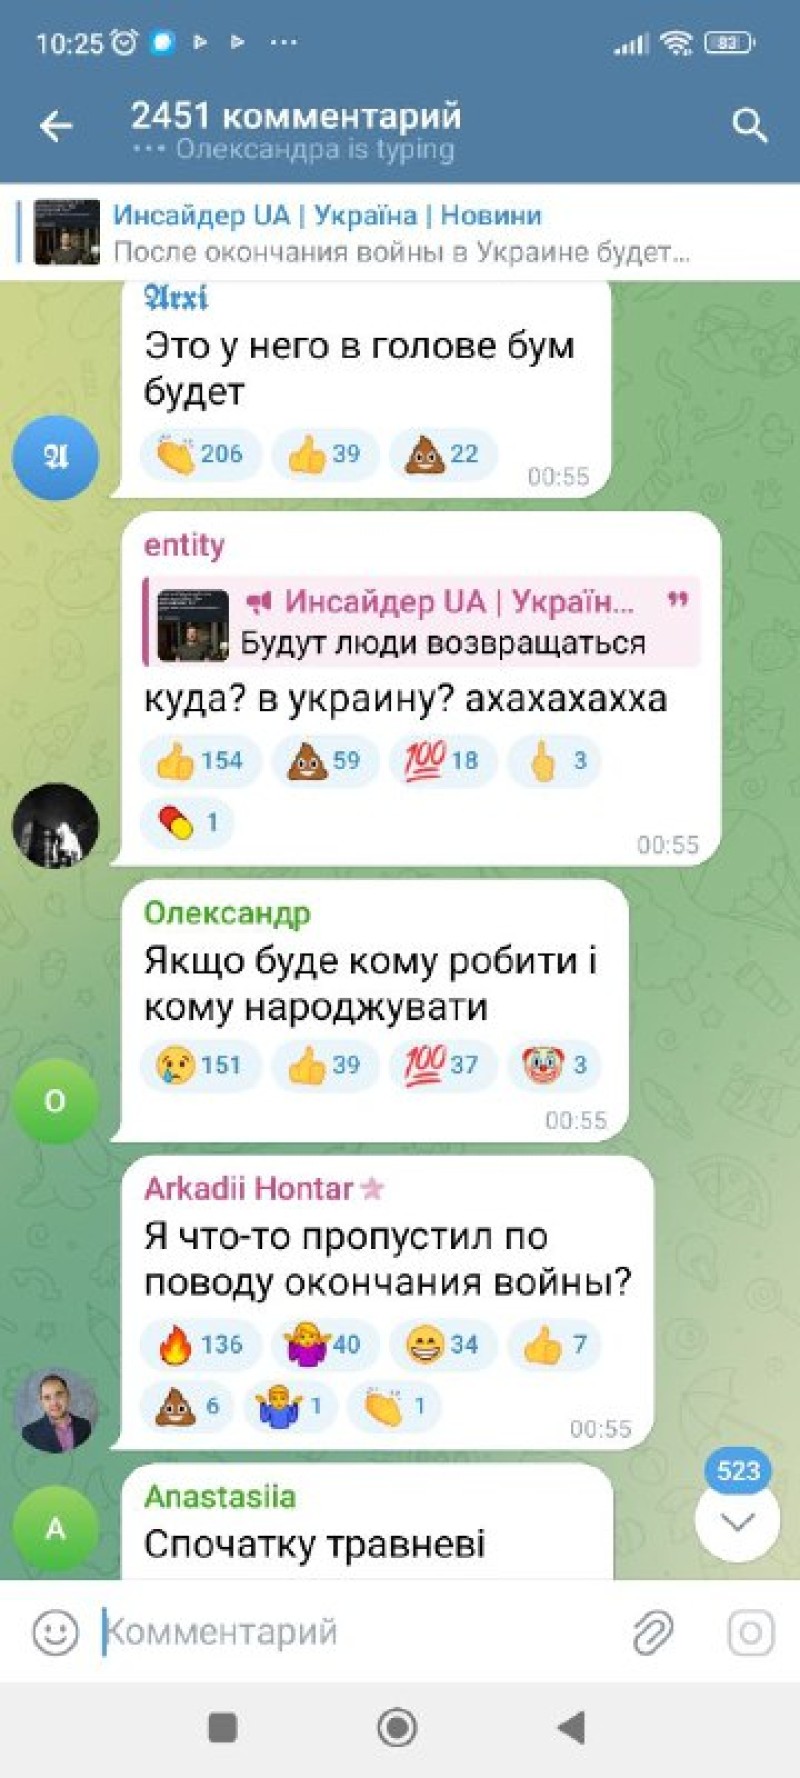 Ukrainians&#39; reaction to Zelensky&#39;s statement about a baby boom in the future.